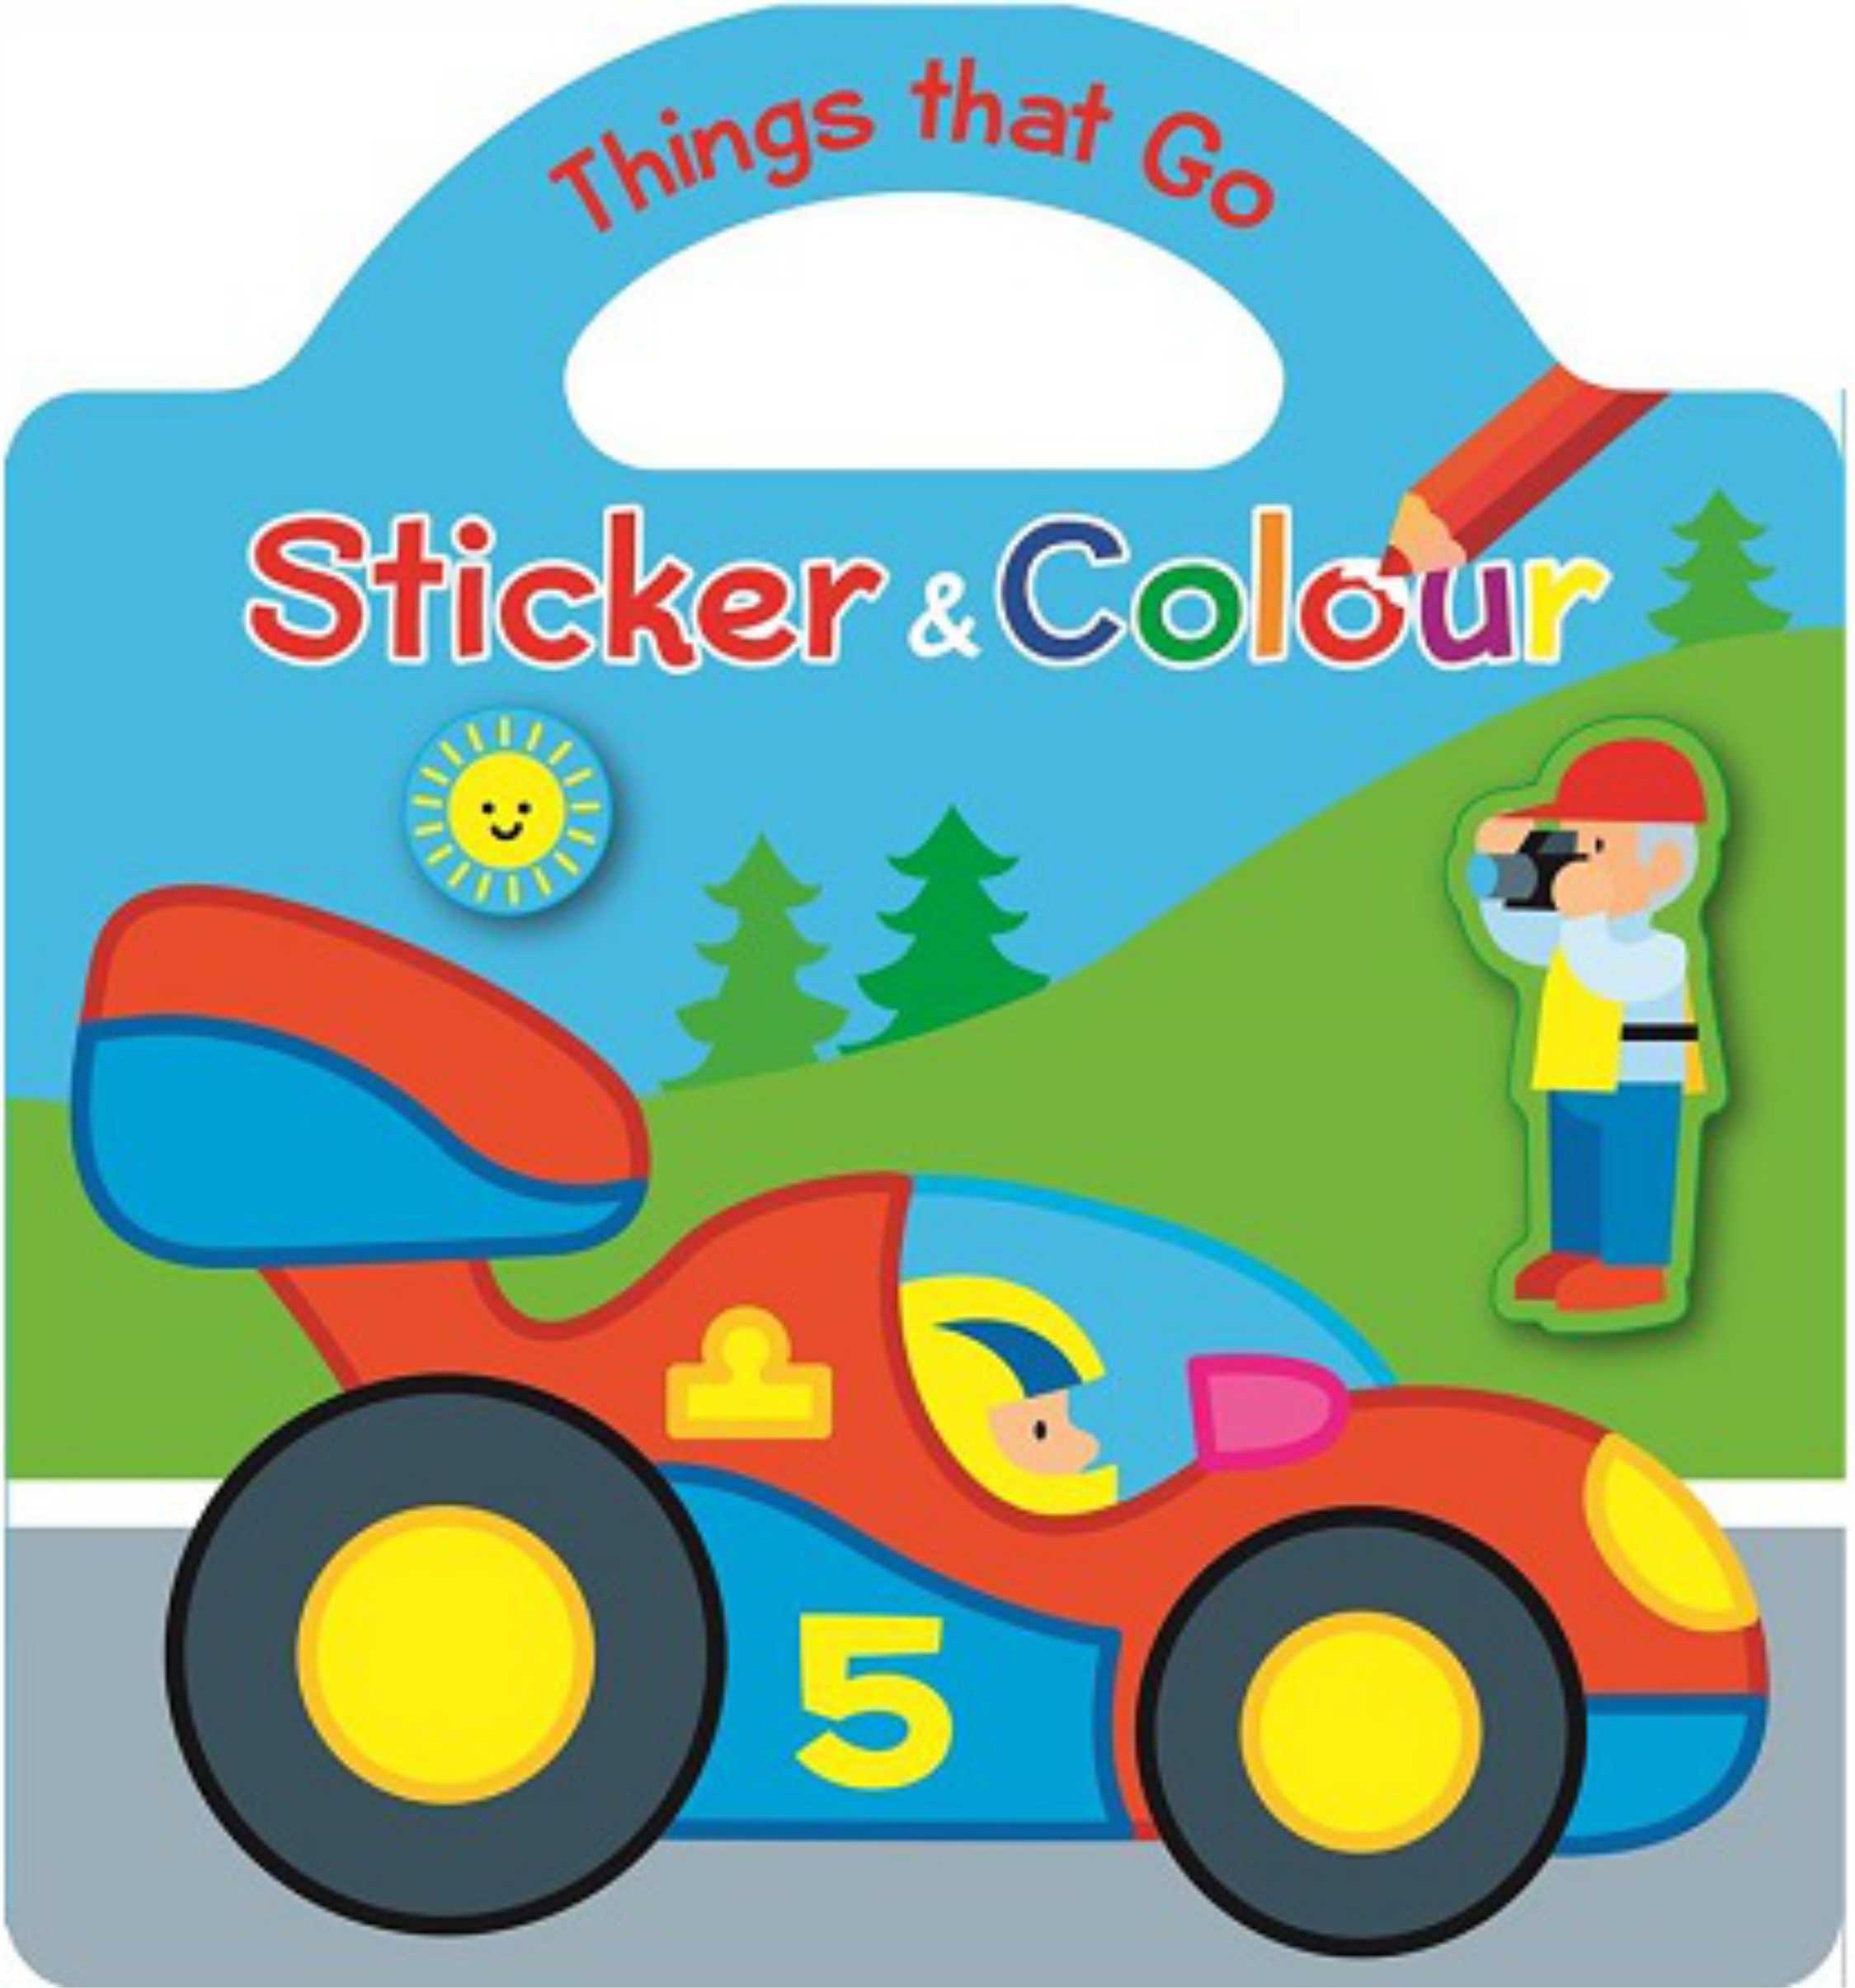 Things That go - Sticker & Colour Book 1